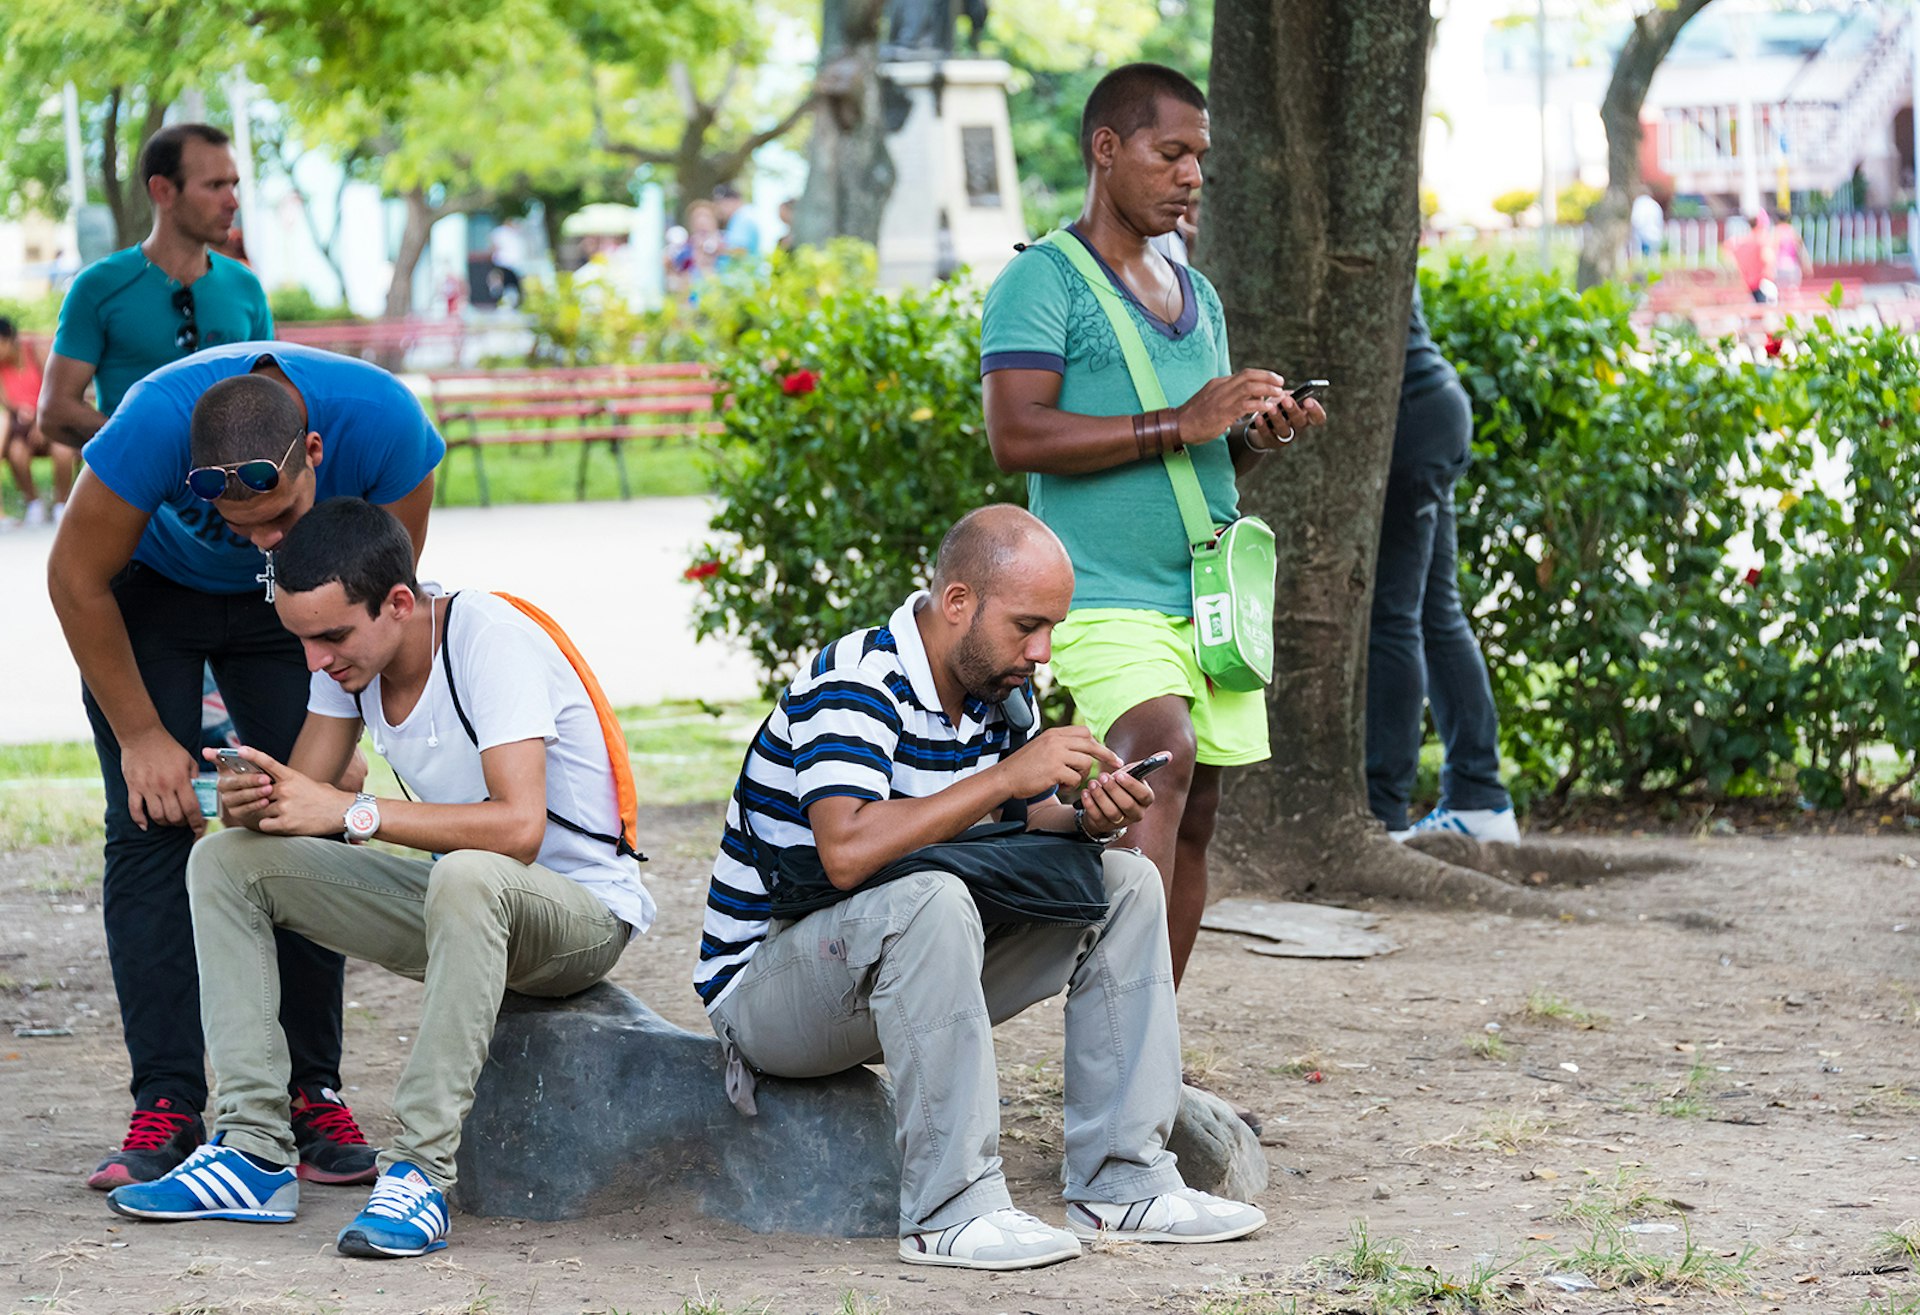 Wi-fi internet is limited, but some plazas in main cities have hotspots, where people gather for internet access. © Roberto Machado Noa / Getty Images